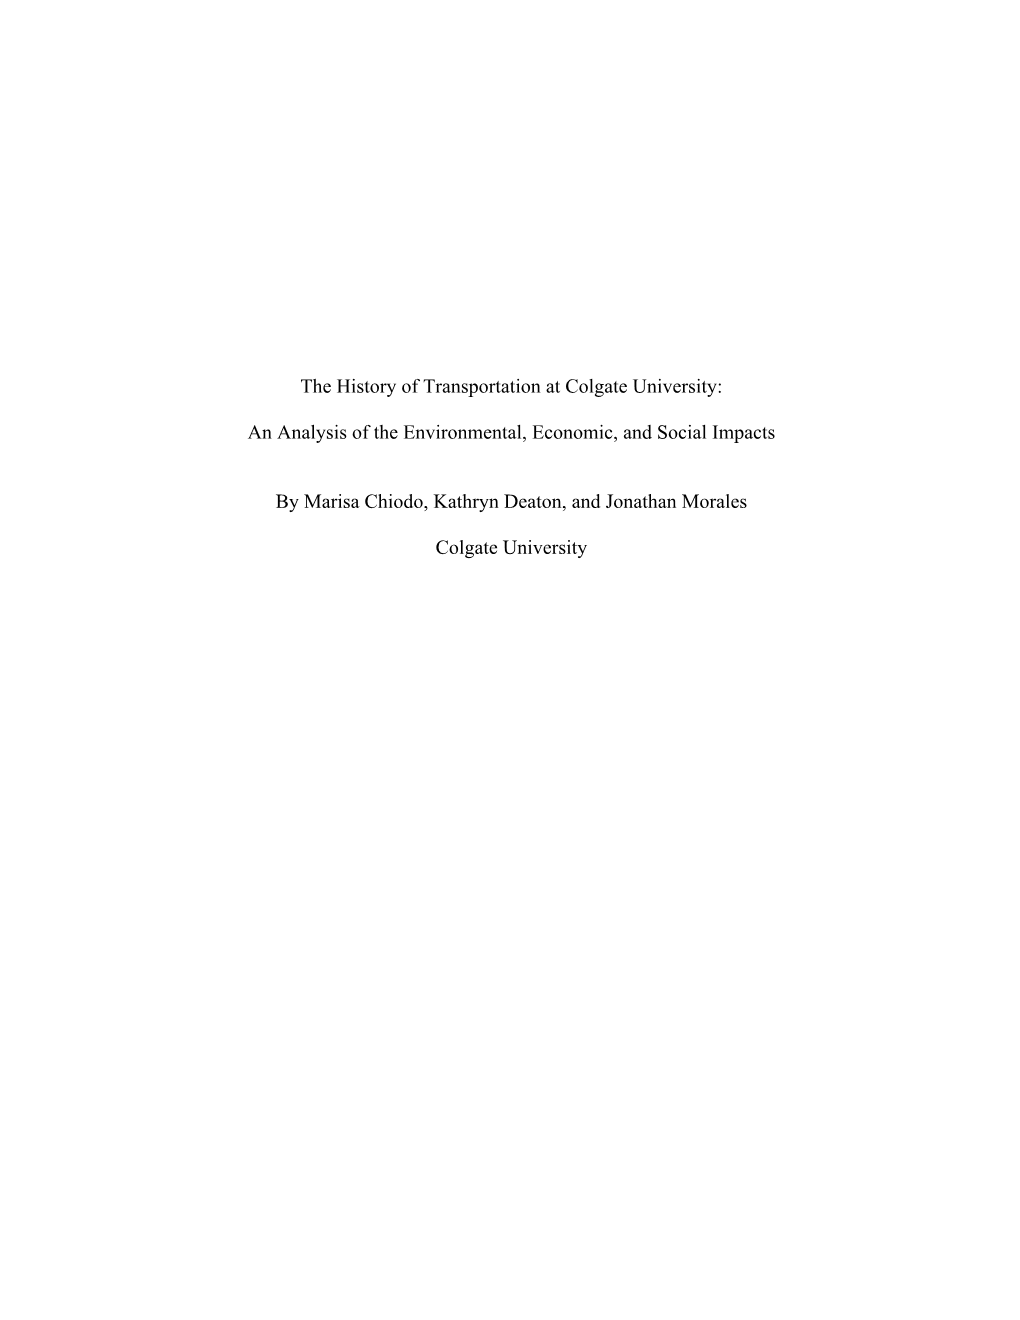 The History of Transportation at Colgate University: an Analysis Of